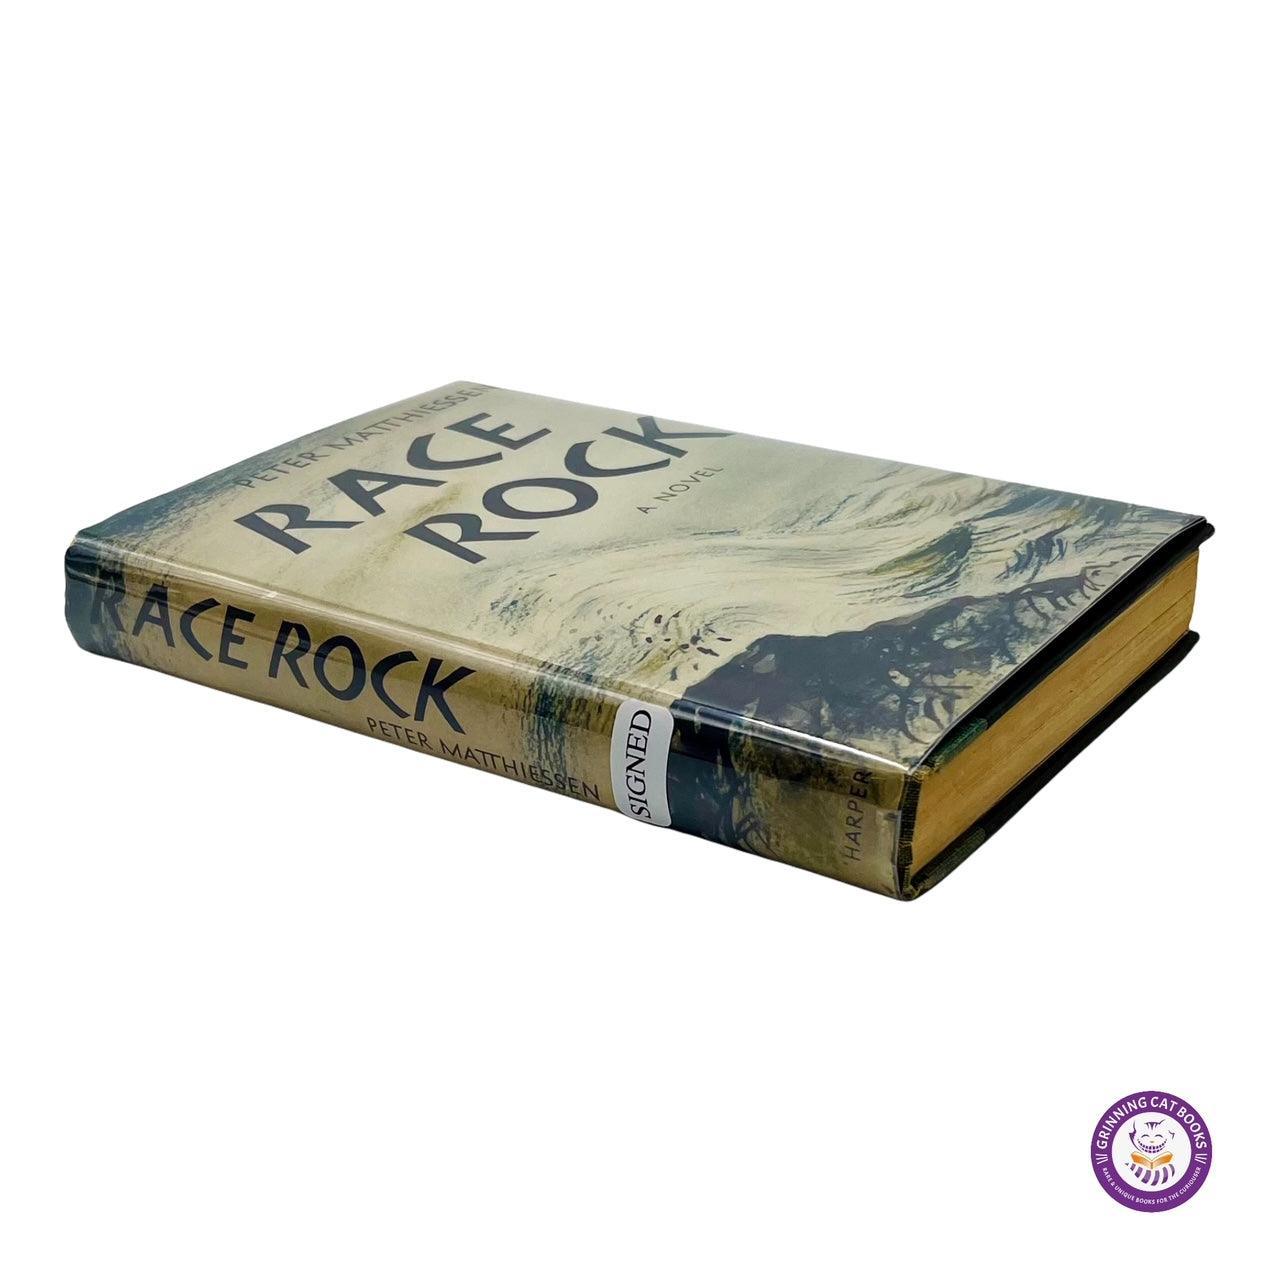 Race Rock (signed by Peter Matthiessen) - Grinning Cat Books - LITERATURE - AMERICAN LITERATURE, SIGNED